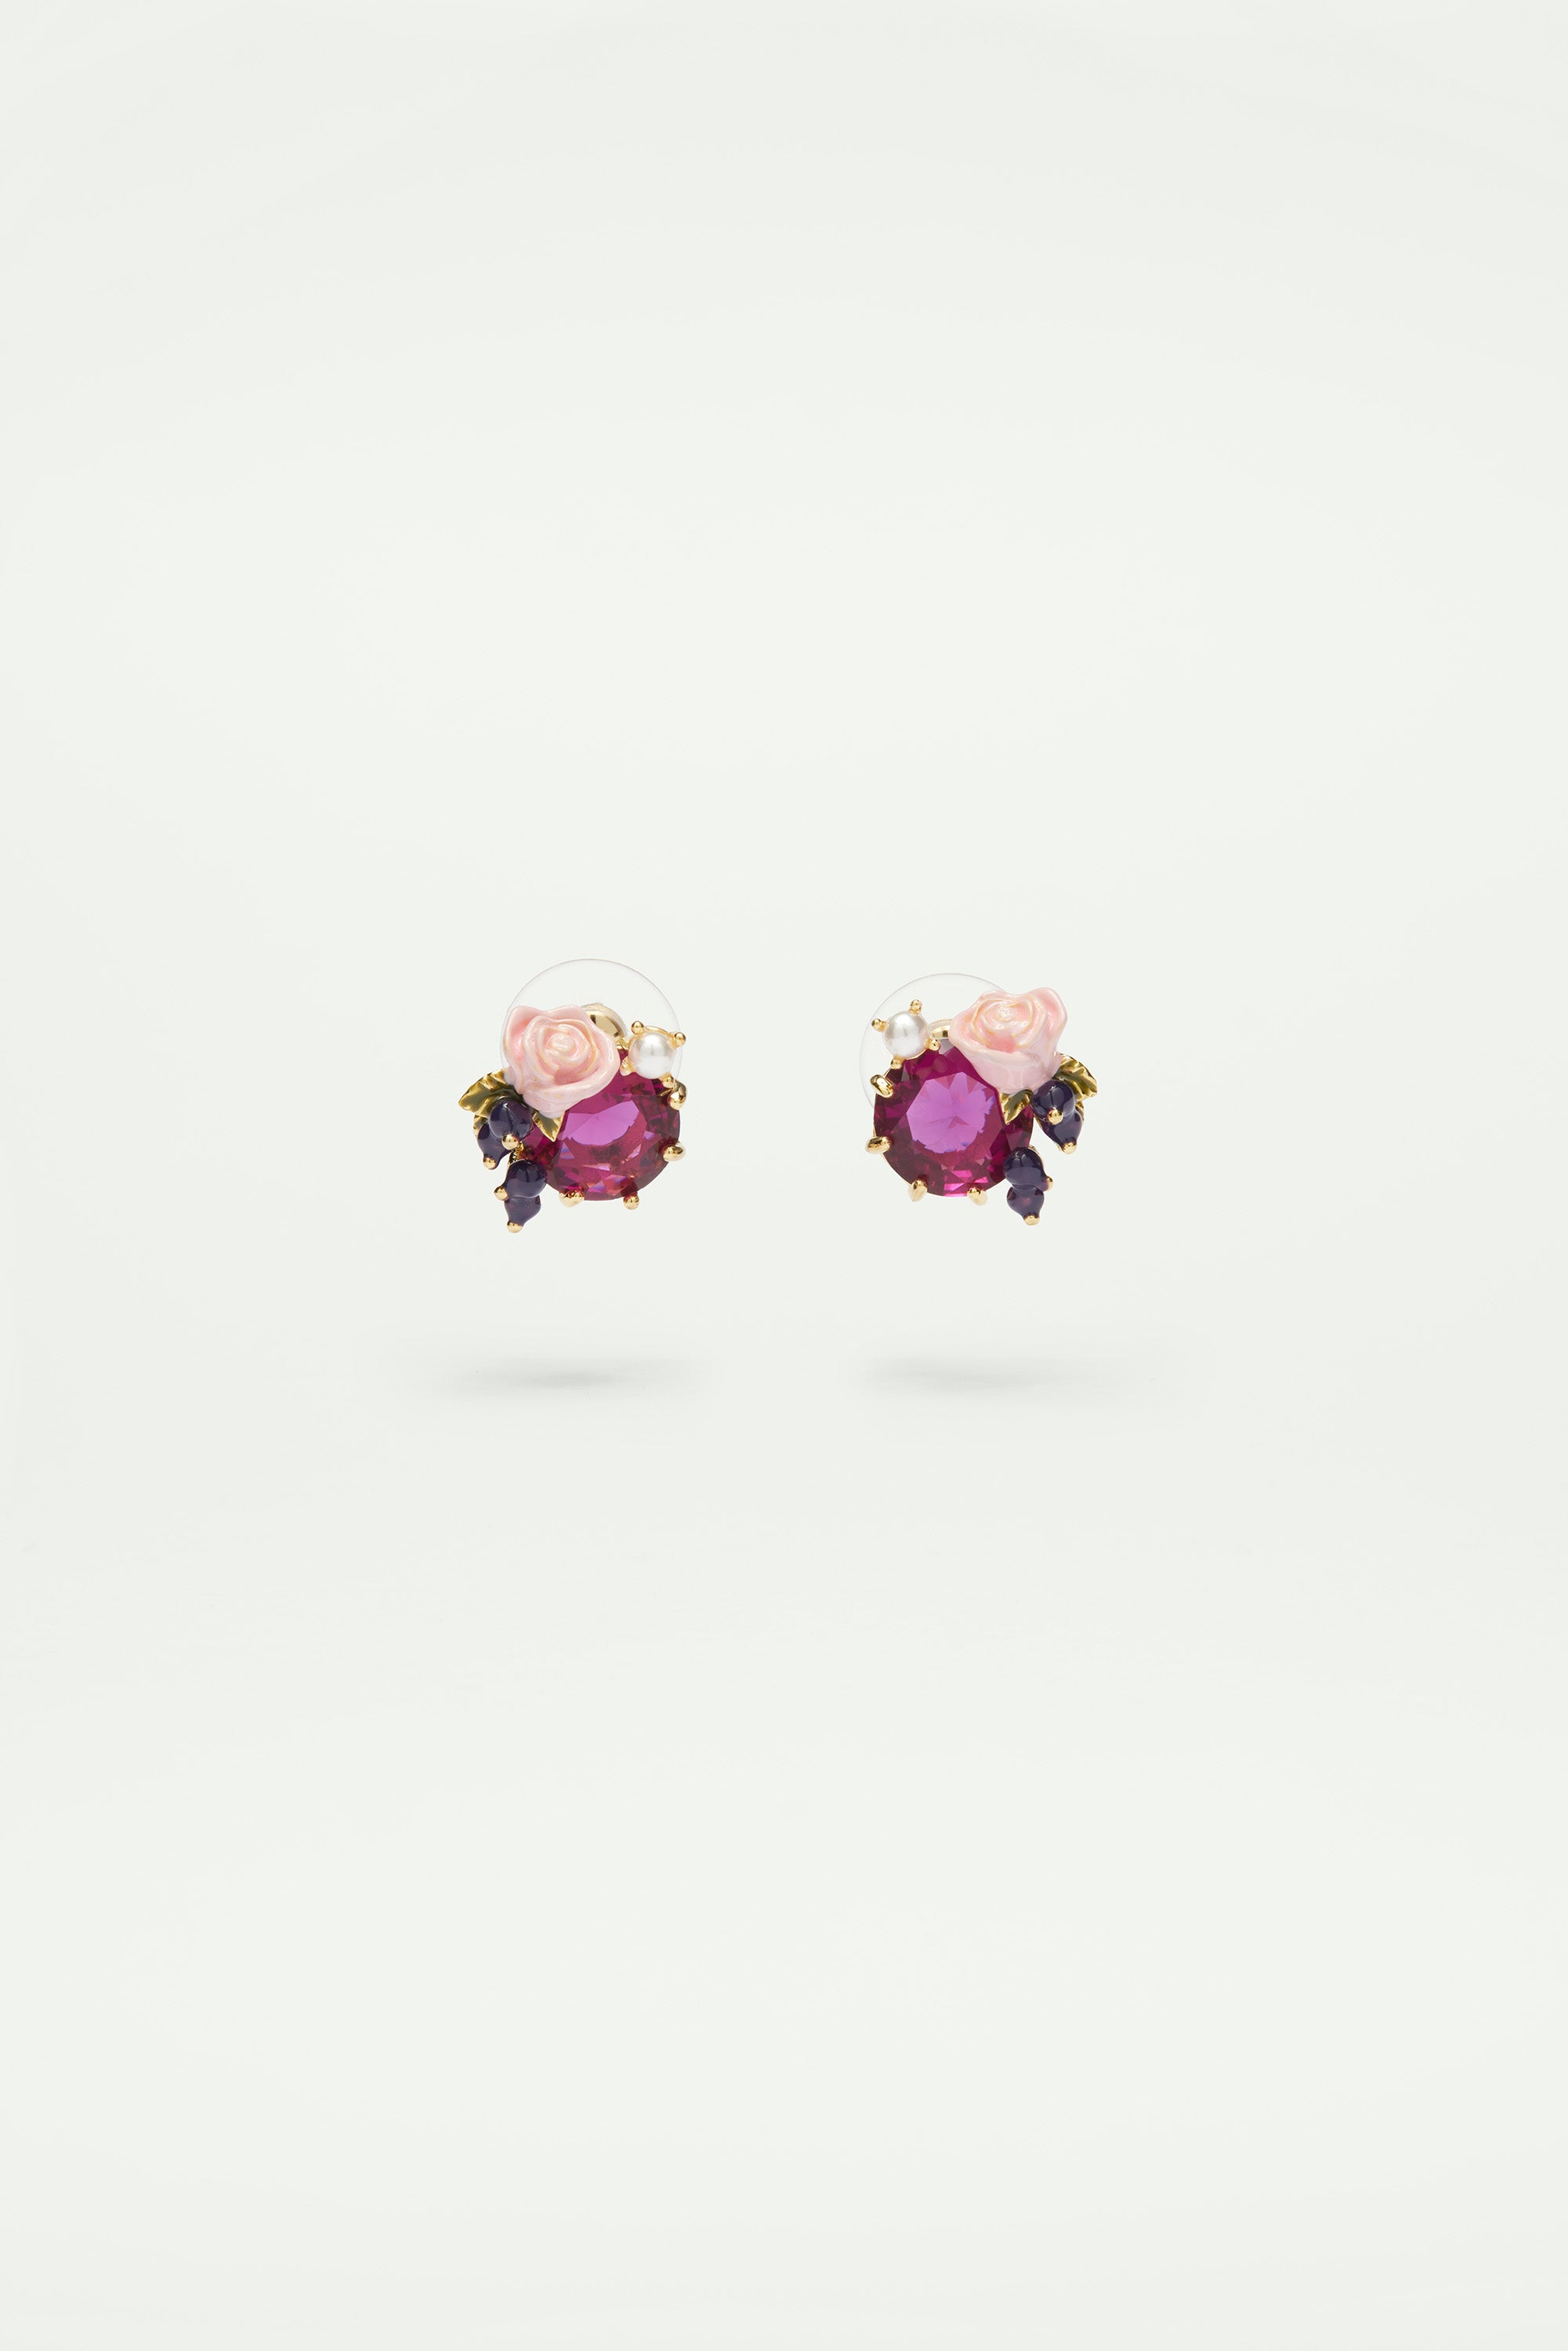 Roses and blackurrant berries clip-on earrings